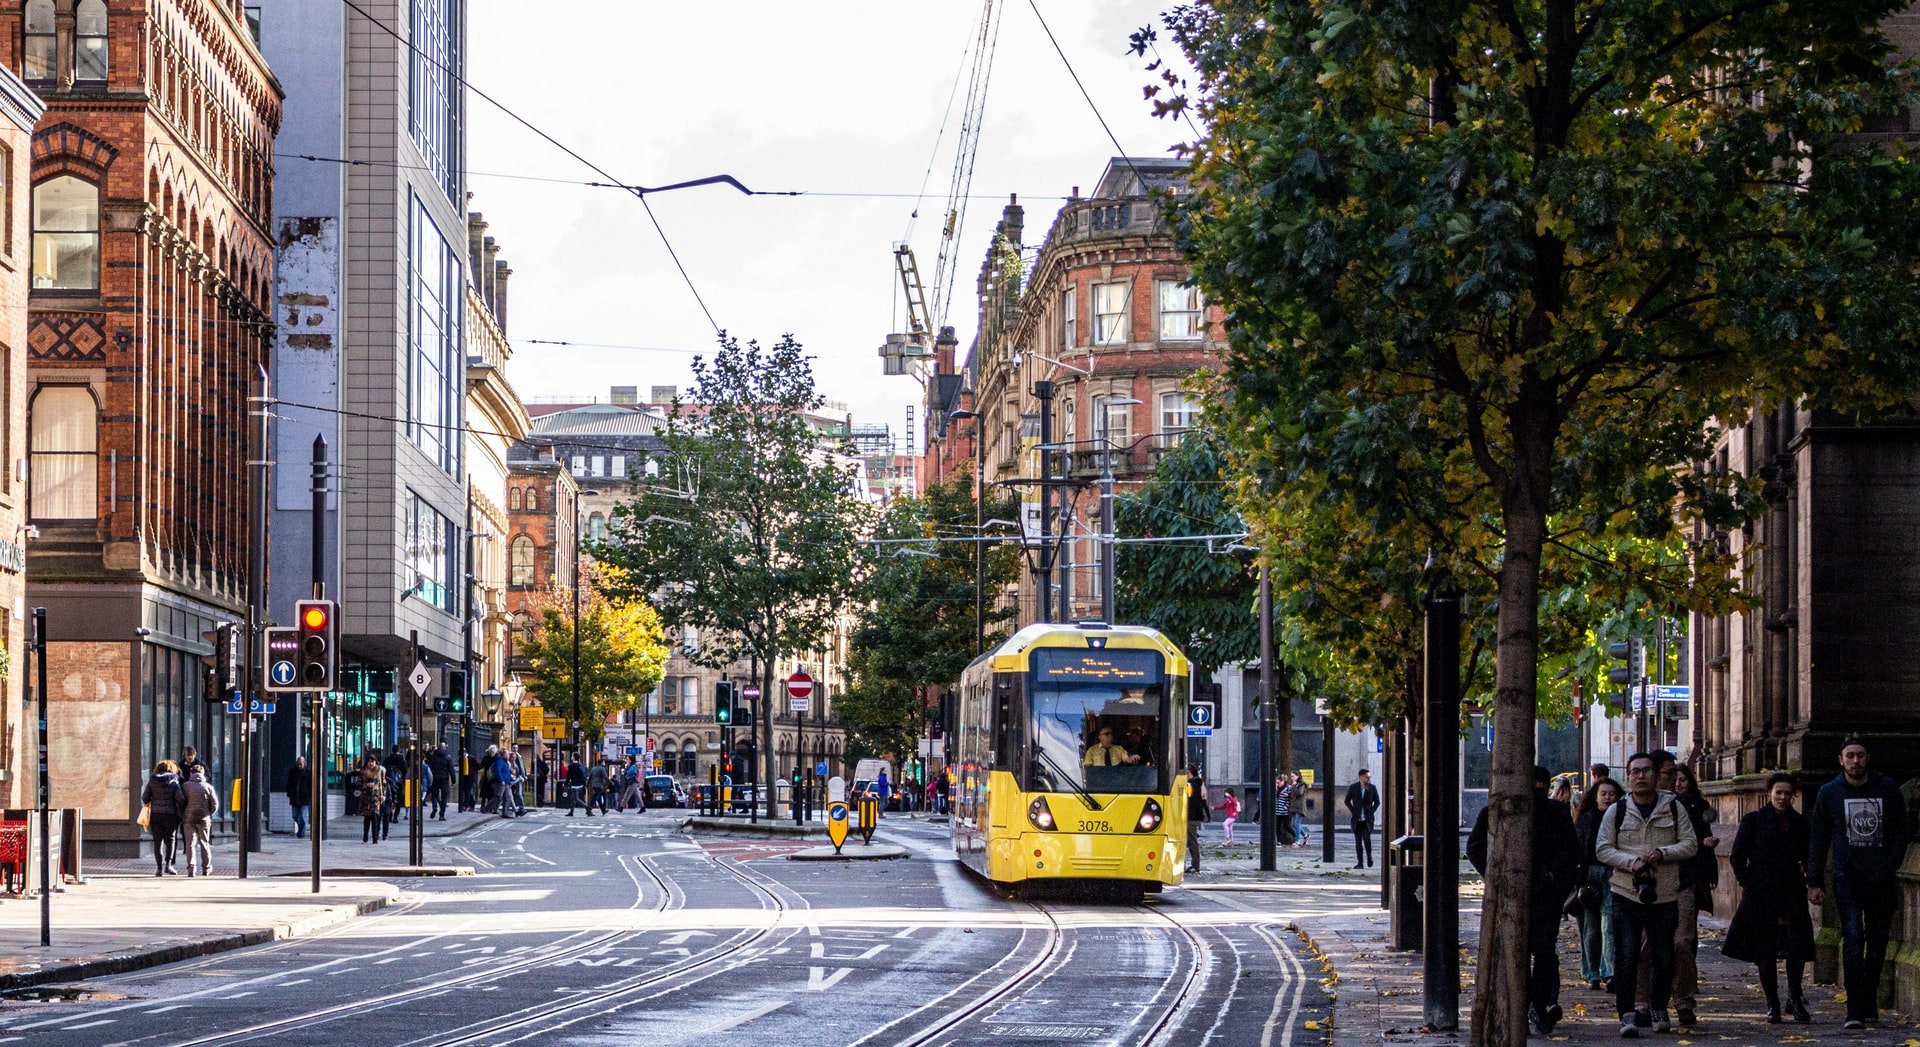 Trams in Manchester